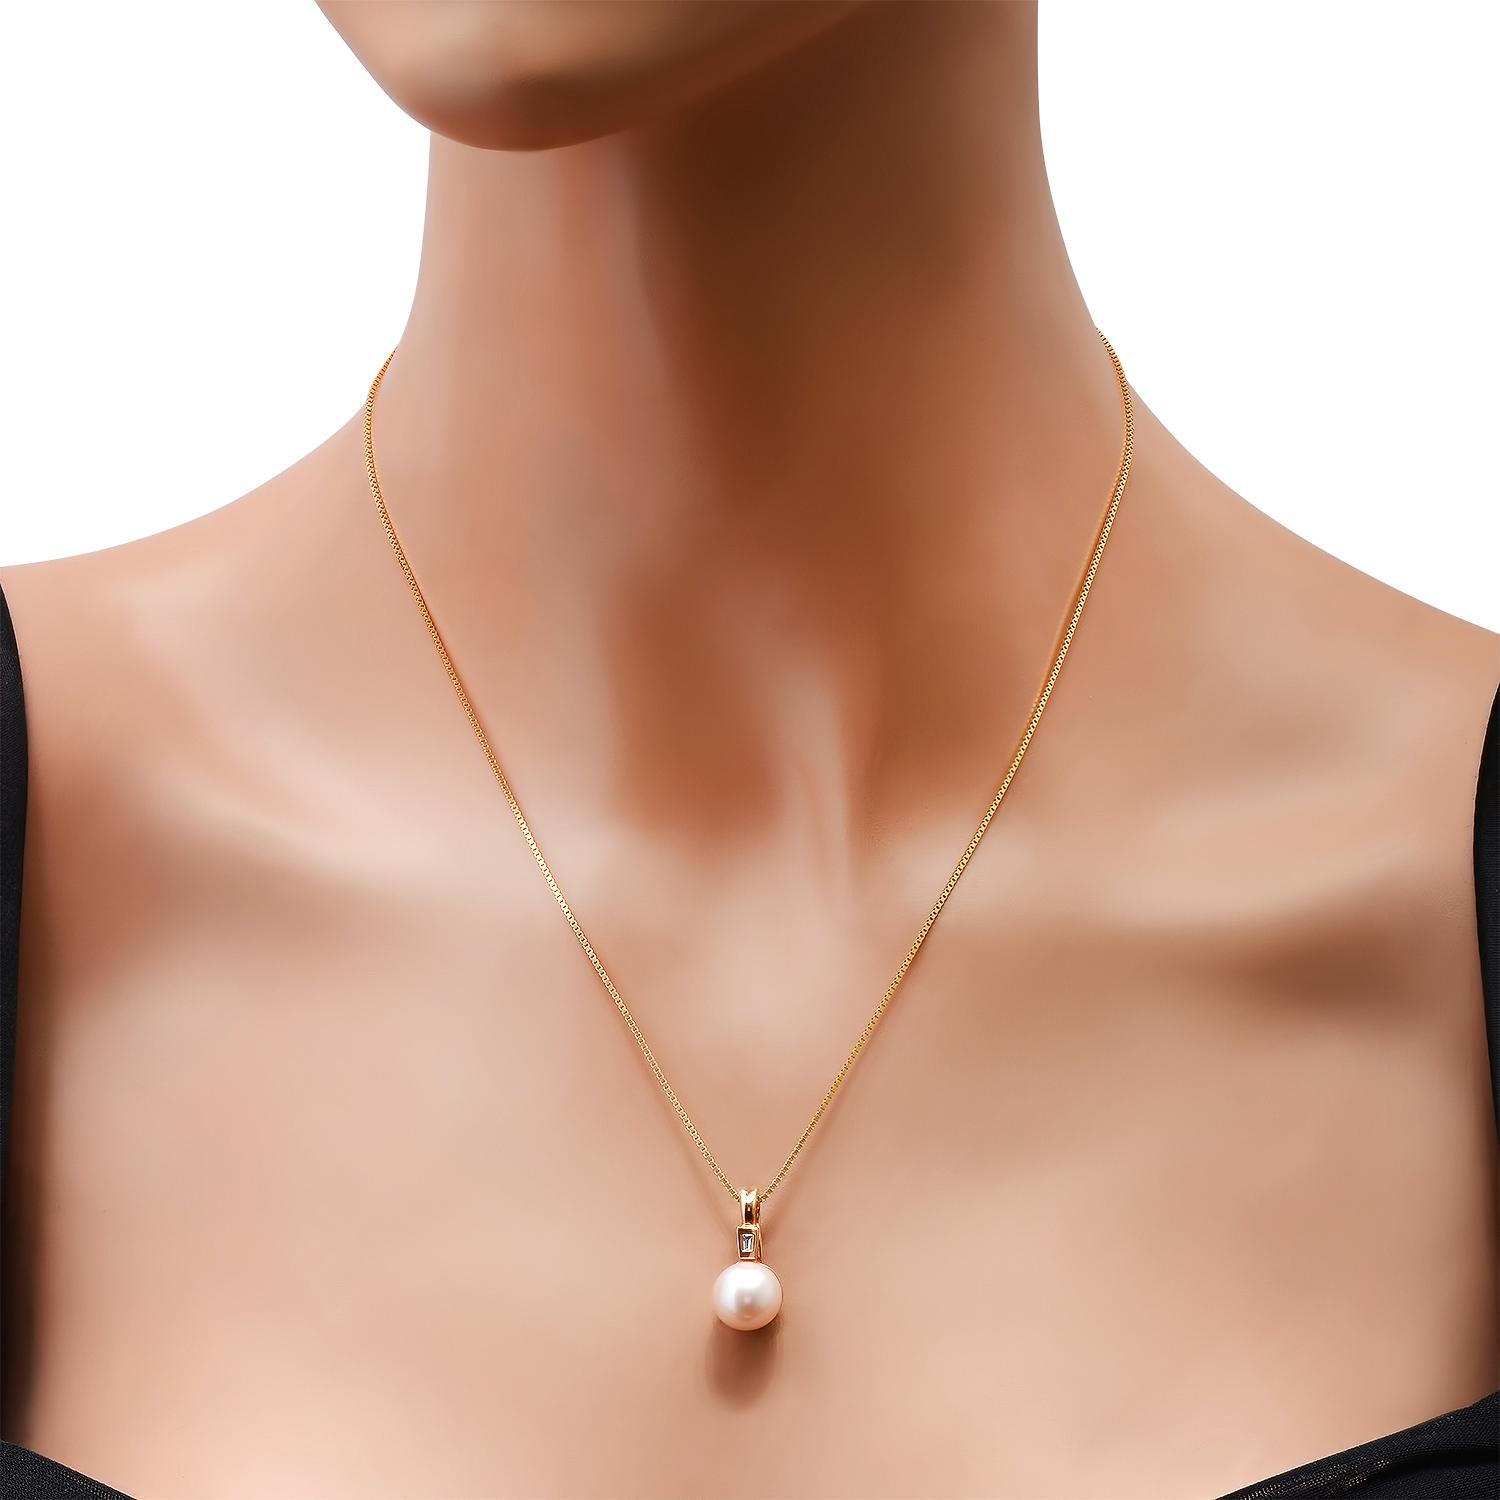 18K Yellow Gold Setting with One 10mm South Sea Pearl and 0.04ct Diamond Pendant